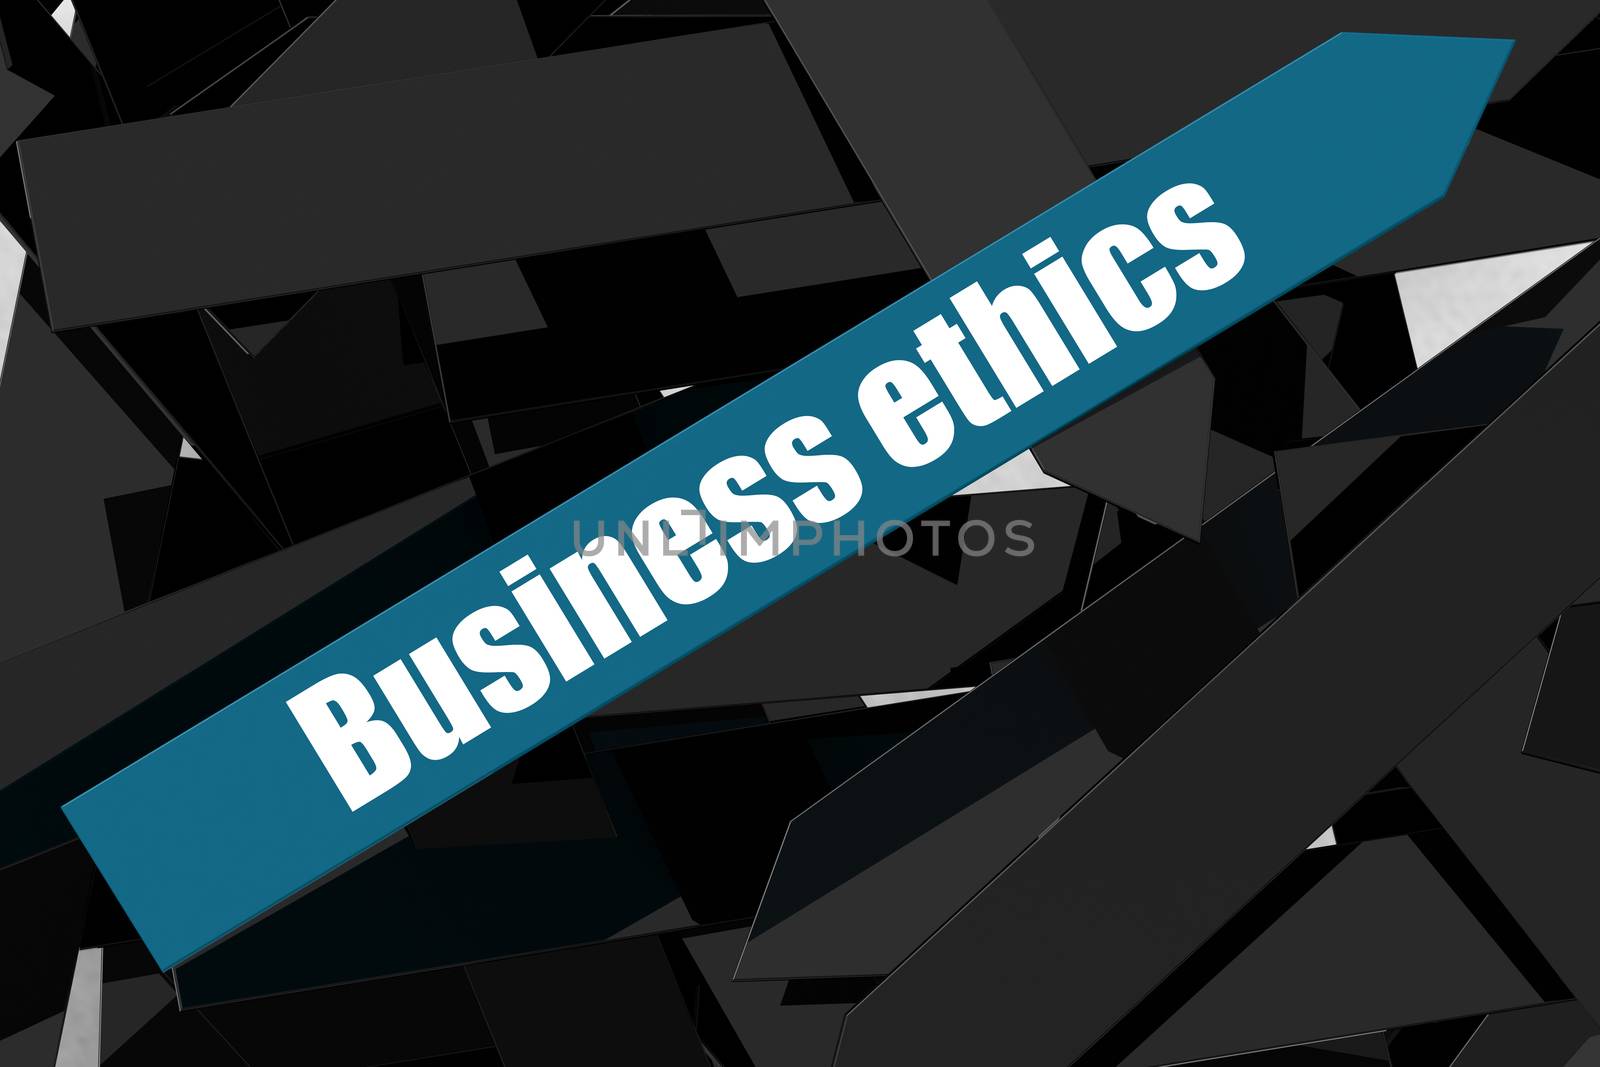 Business ethics word on the blue arrow, 3D rendering